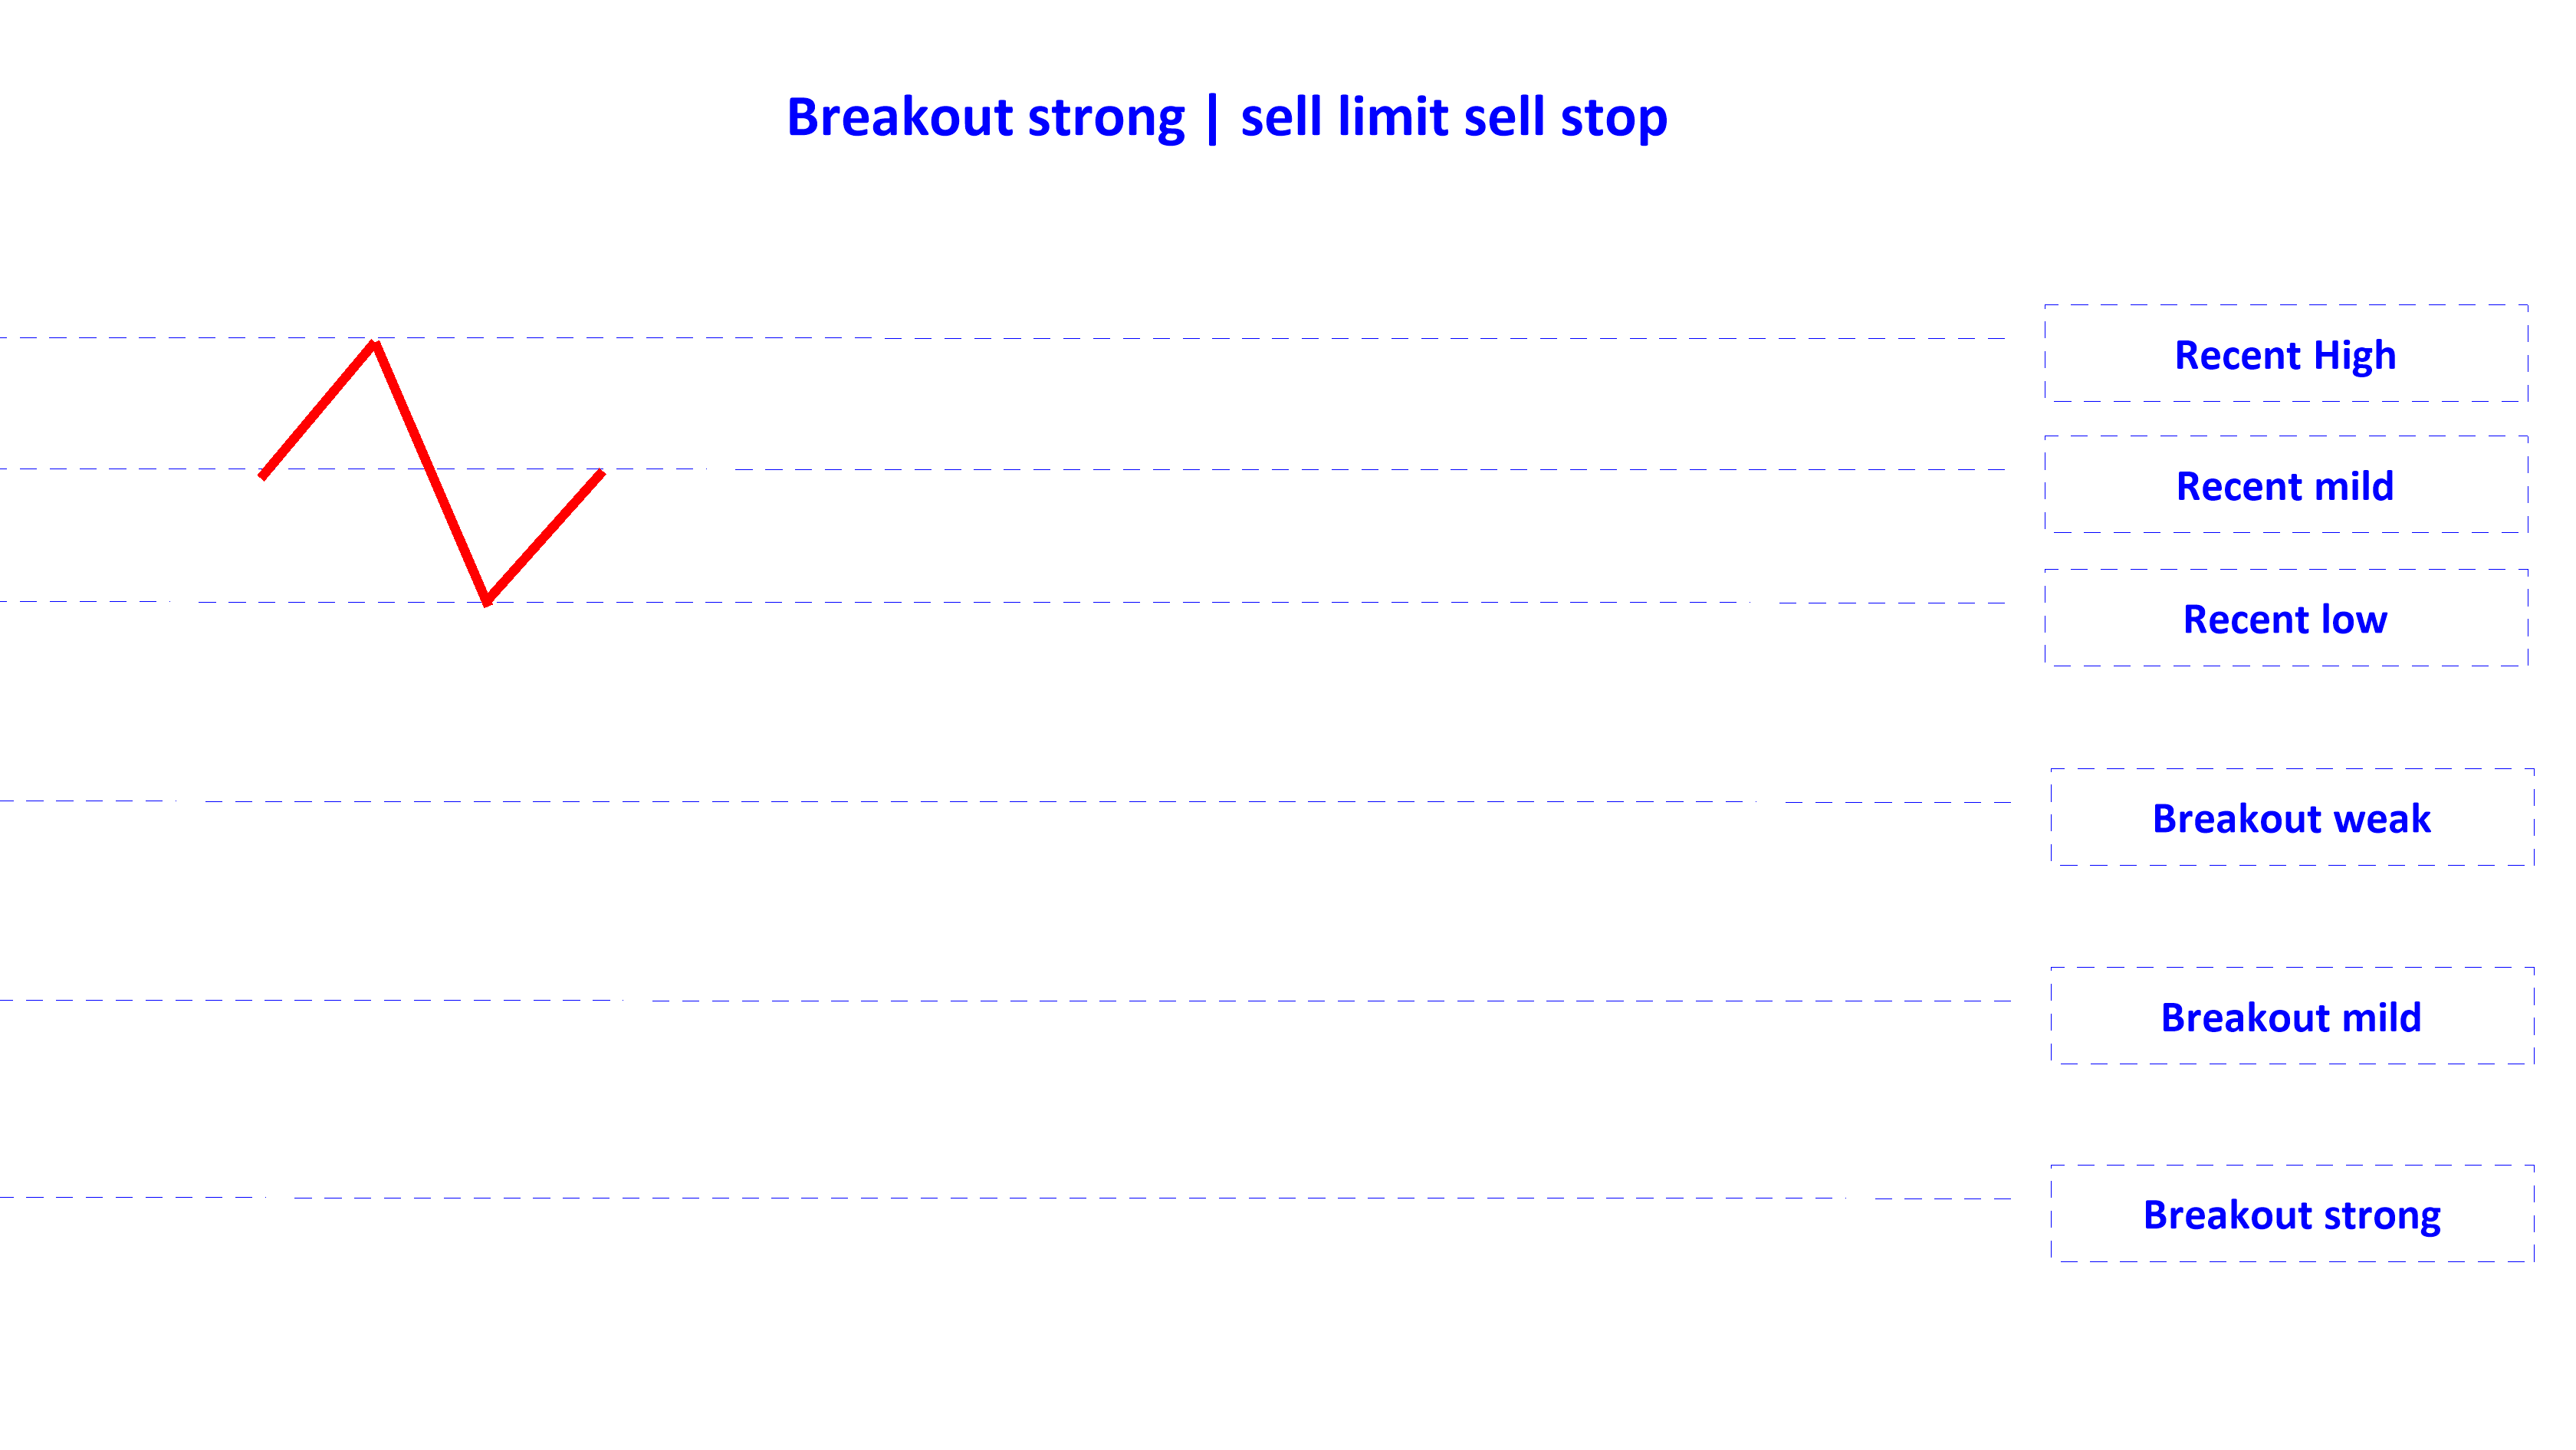 breakout strong sell limit sell stop en